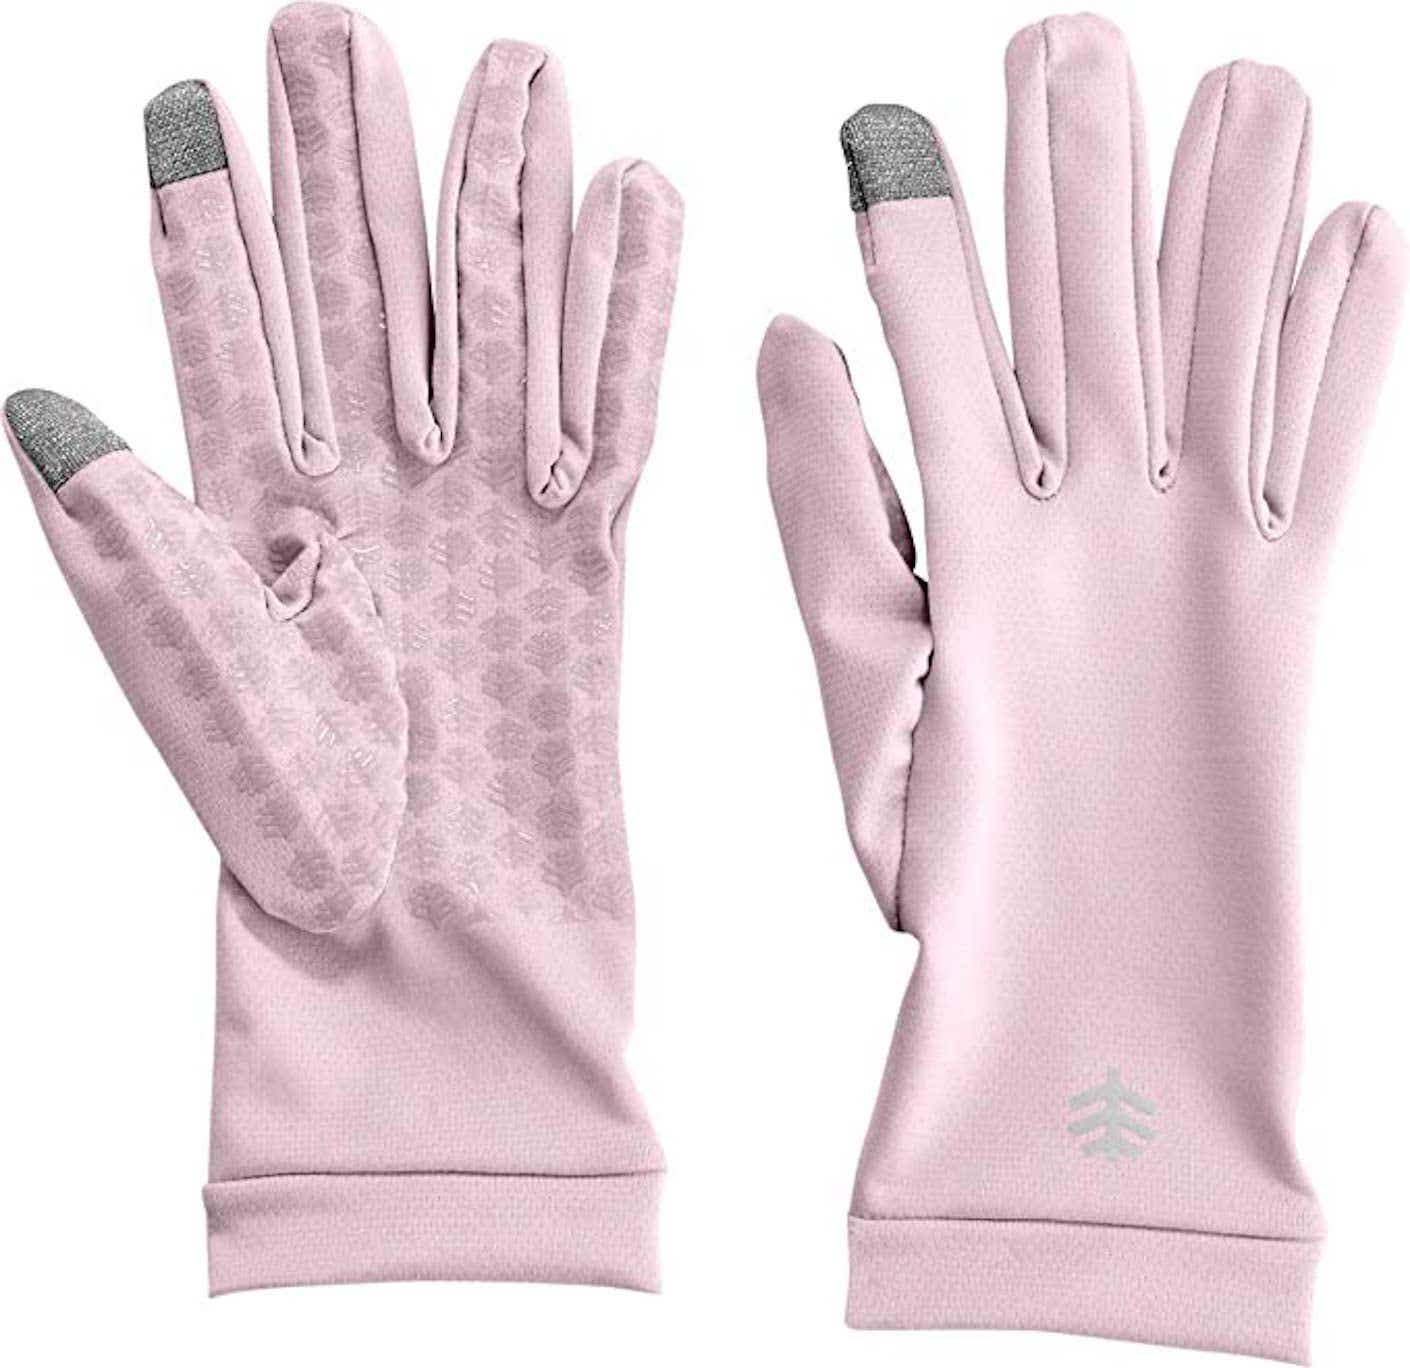 gloves for sun protection